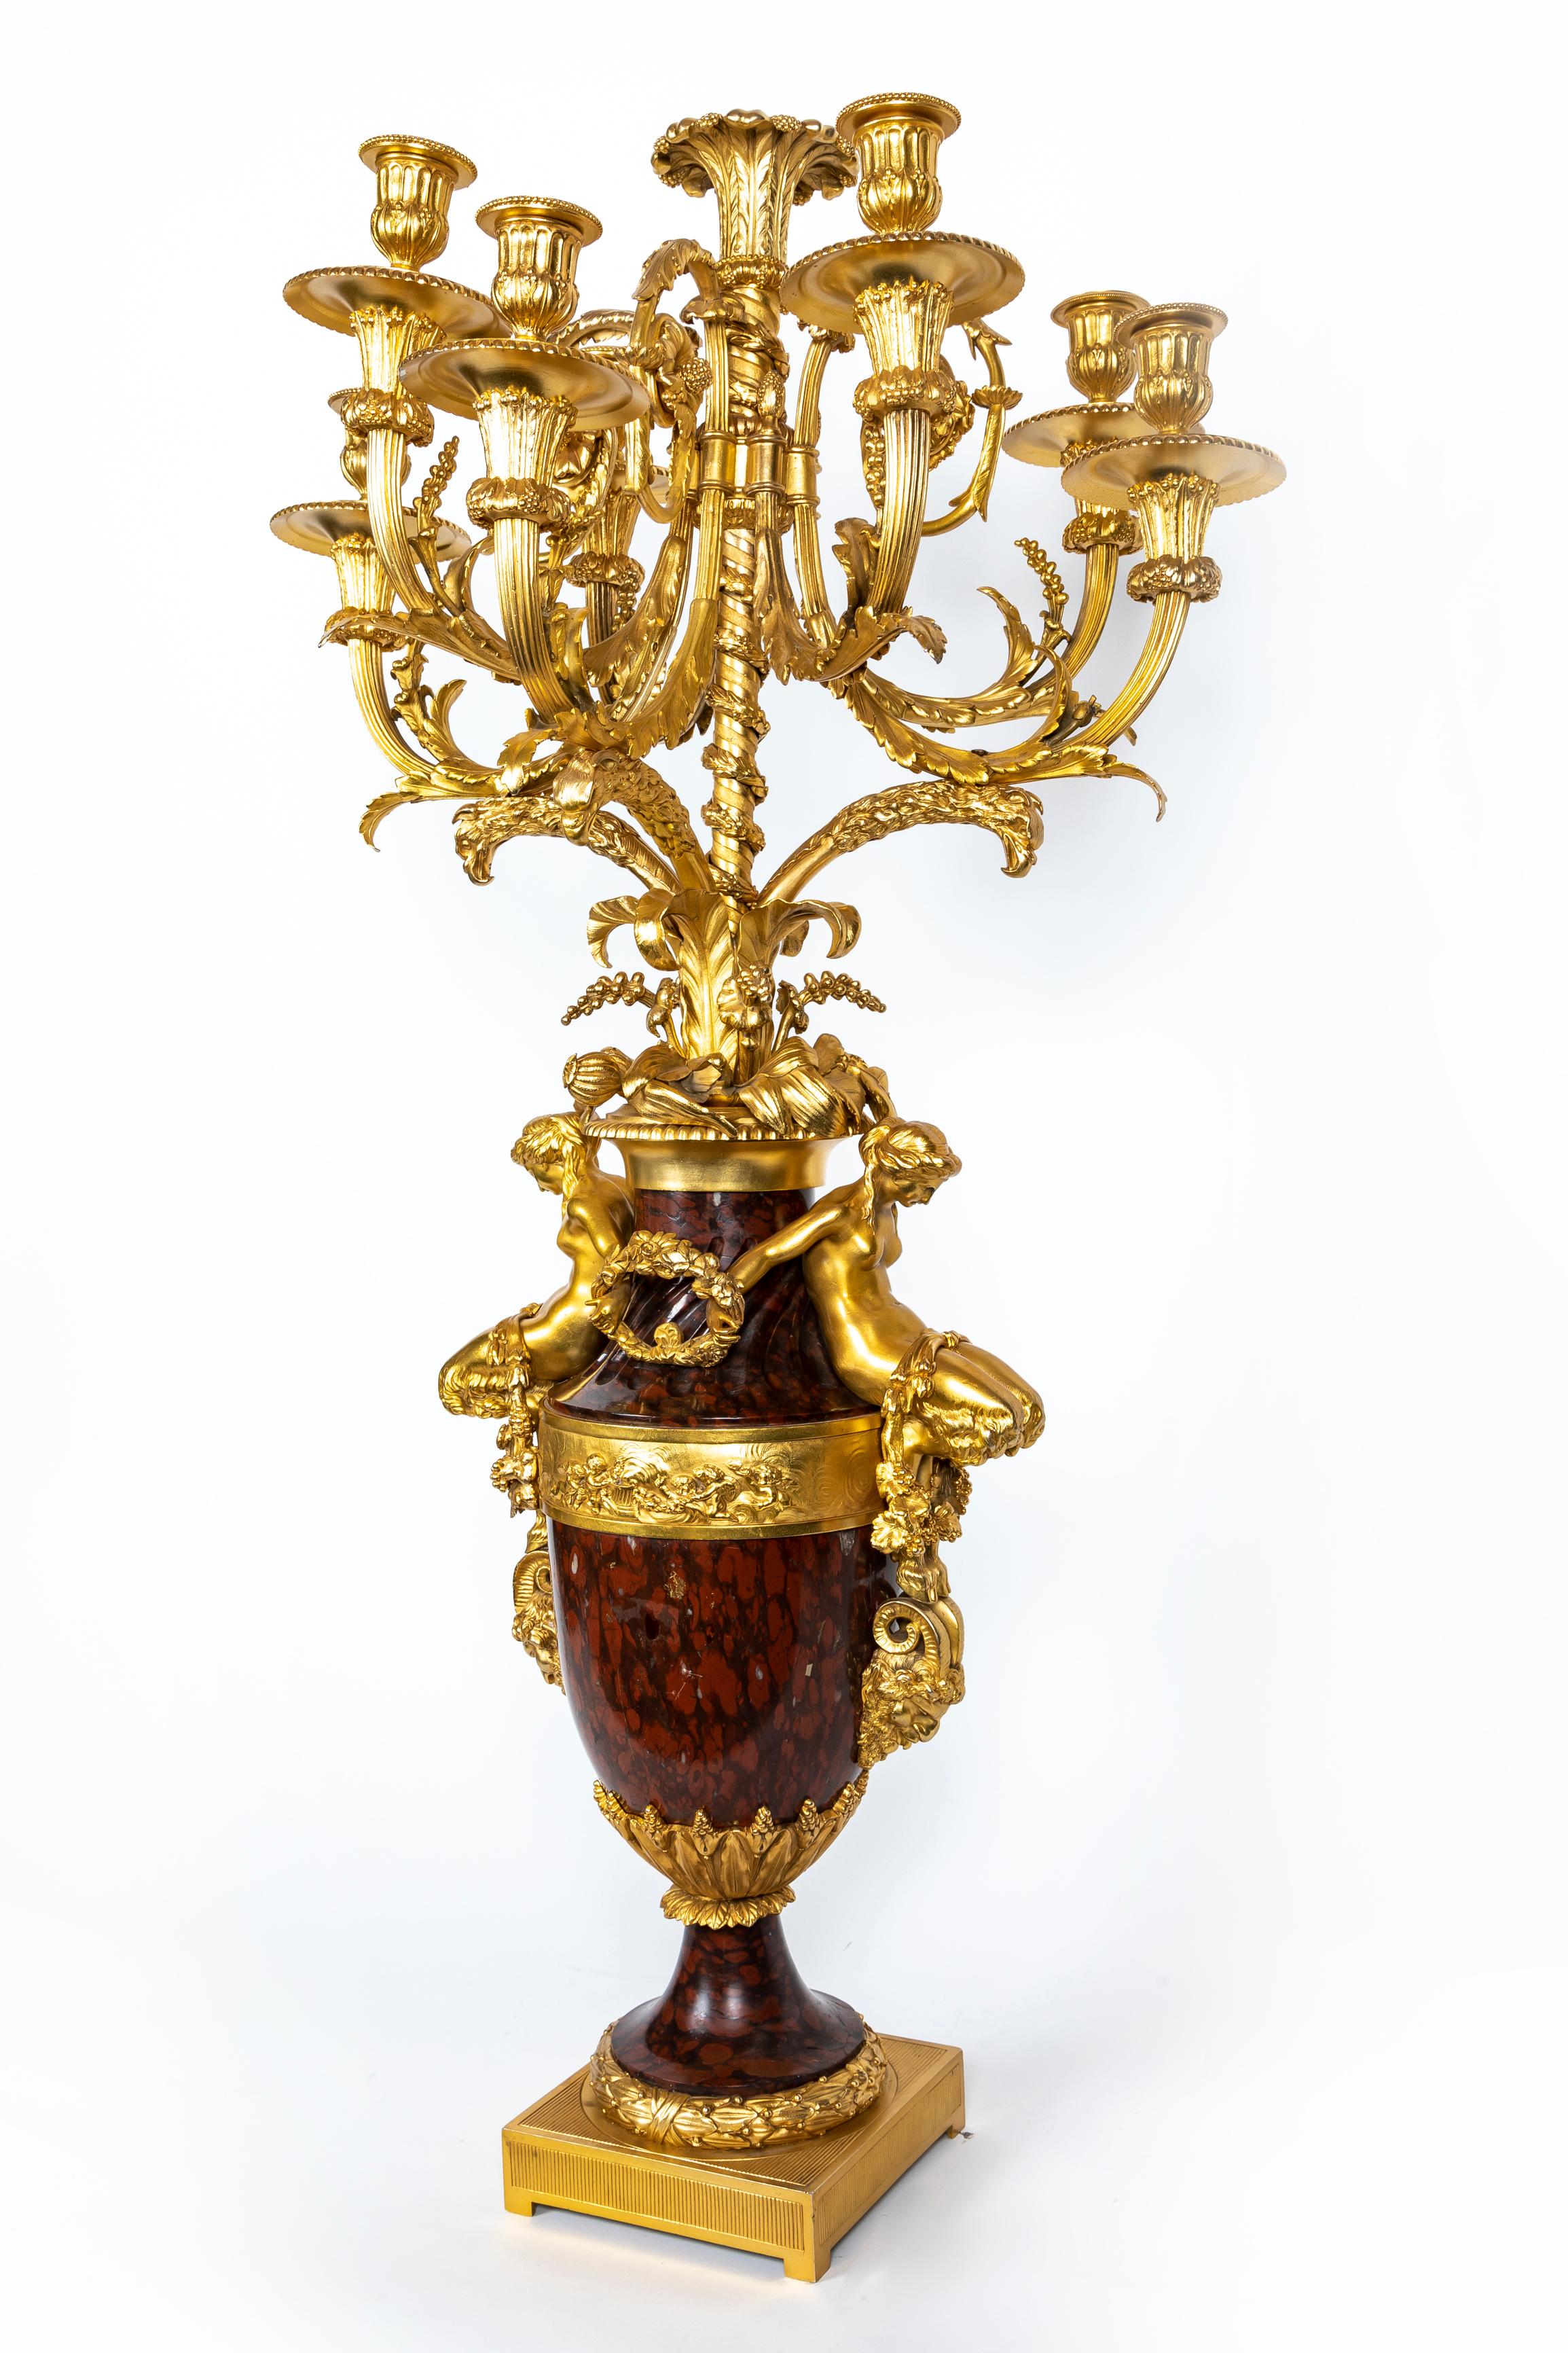 19th Century A Pair of Large Antique French Louis XVI Gilt Bronze and Marble Candelabras For Sale